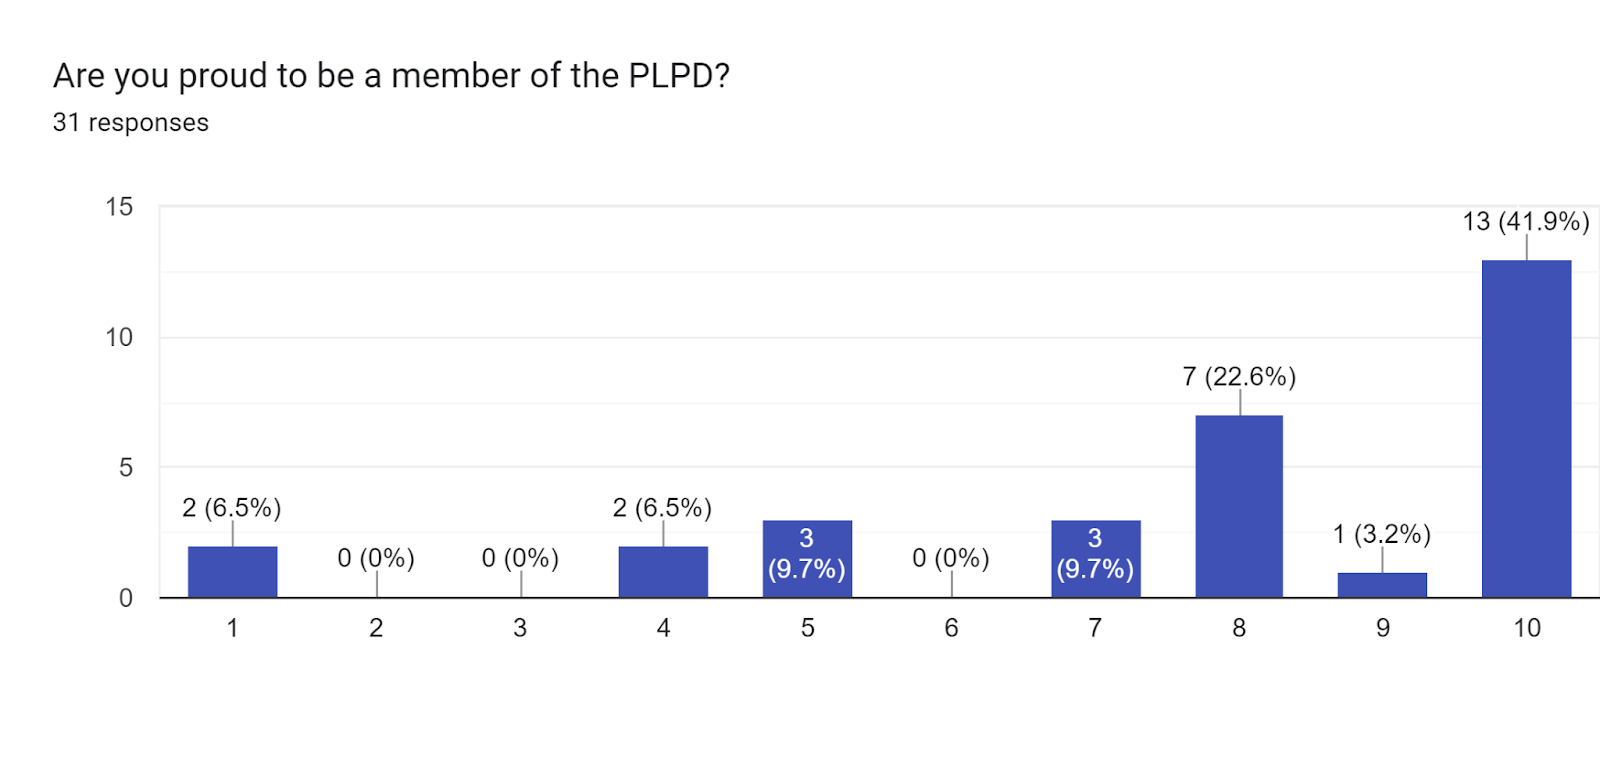 Forms response chart. Question title: Are you proud to be a member of the PLPD?. Number of responses: 31 responses.